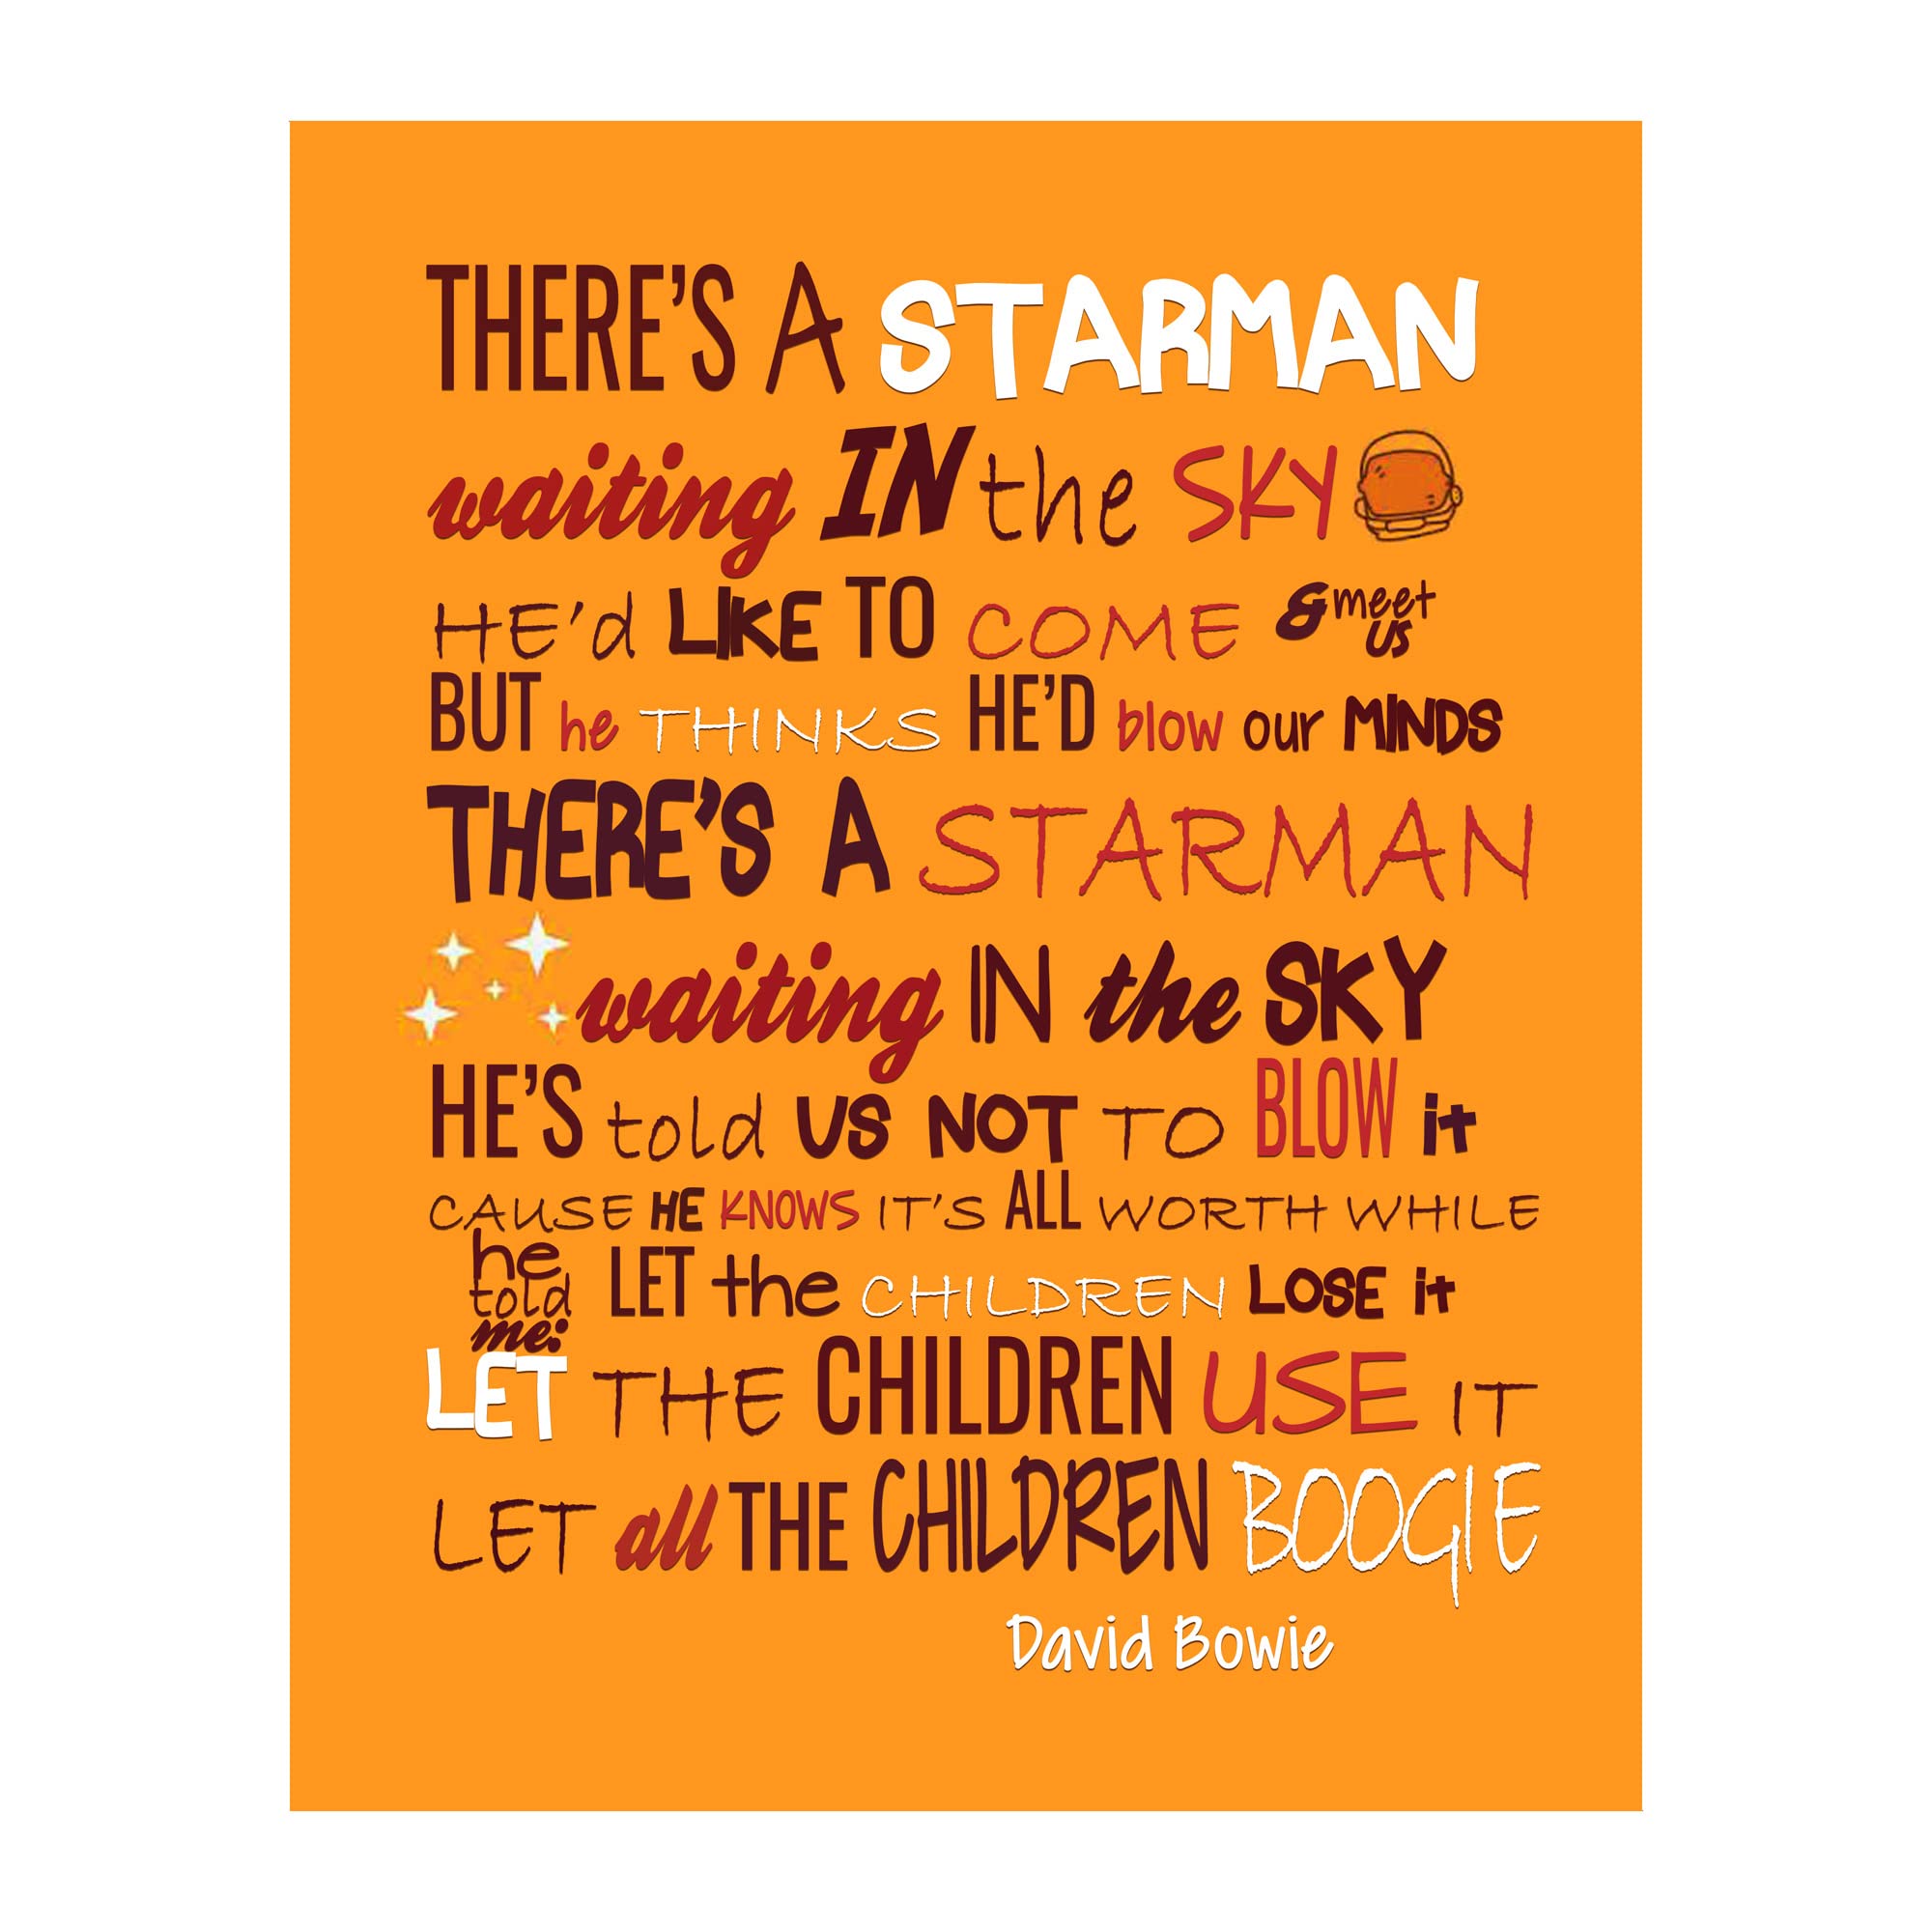 Starman - David Bowie Music Decor Wall Art, This Retro Vintage Decor Music Poster is A Great Wall Decor Retro Print For Music Room, Office Decor Home Decor, or Lounge Room Decor, Unframed - 8x10